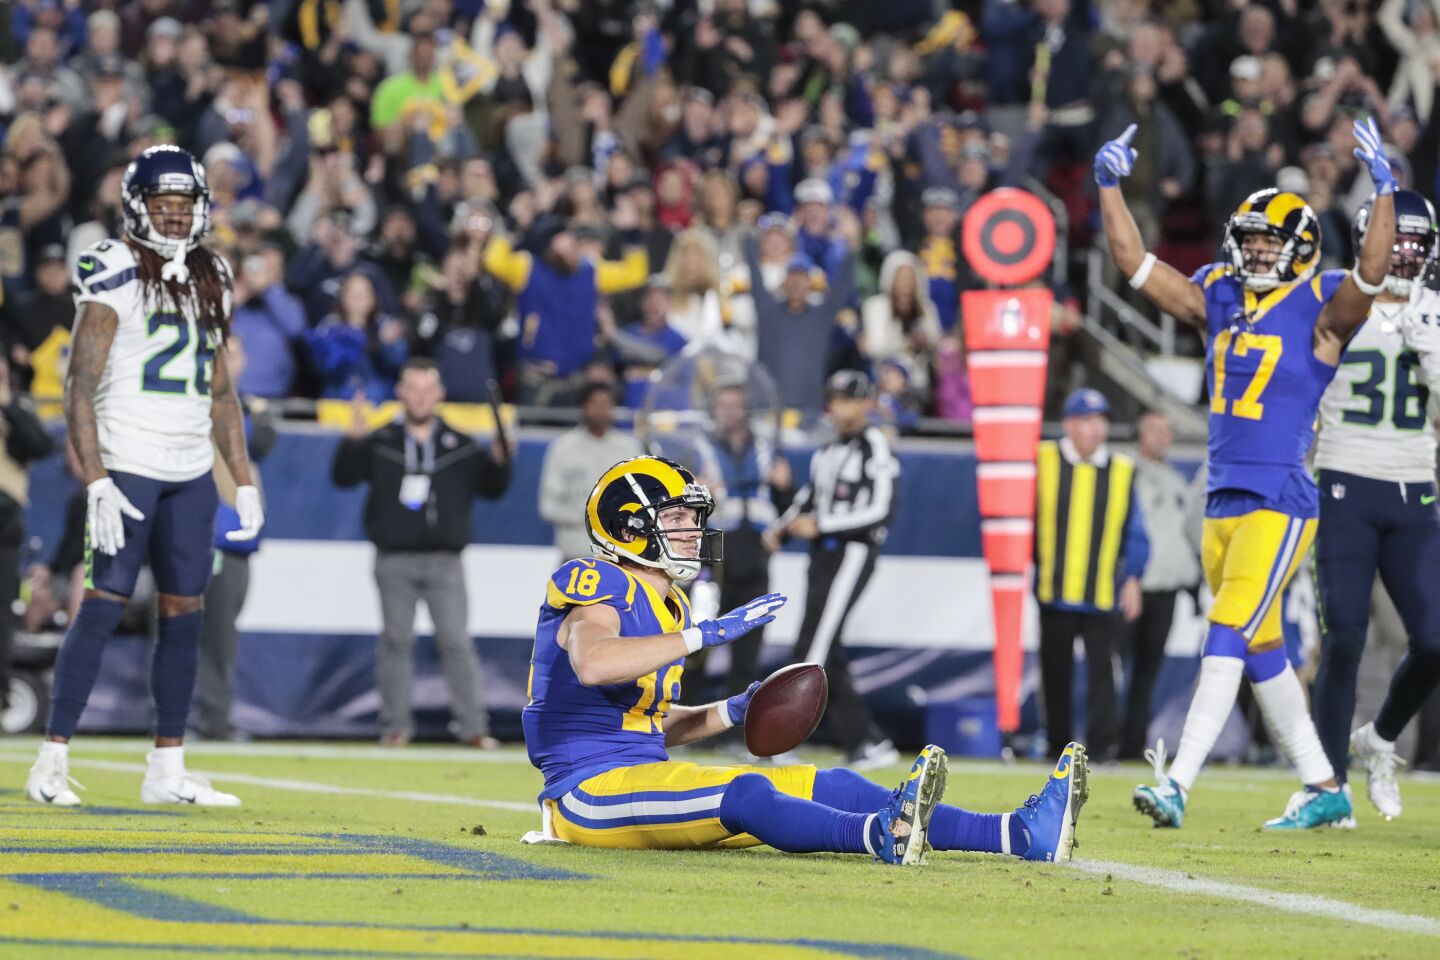 Rams wide receiver Cooper Kupp sits in the end zone after catching a touchdown pass.